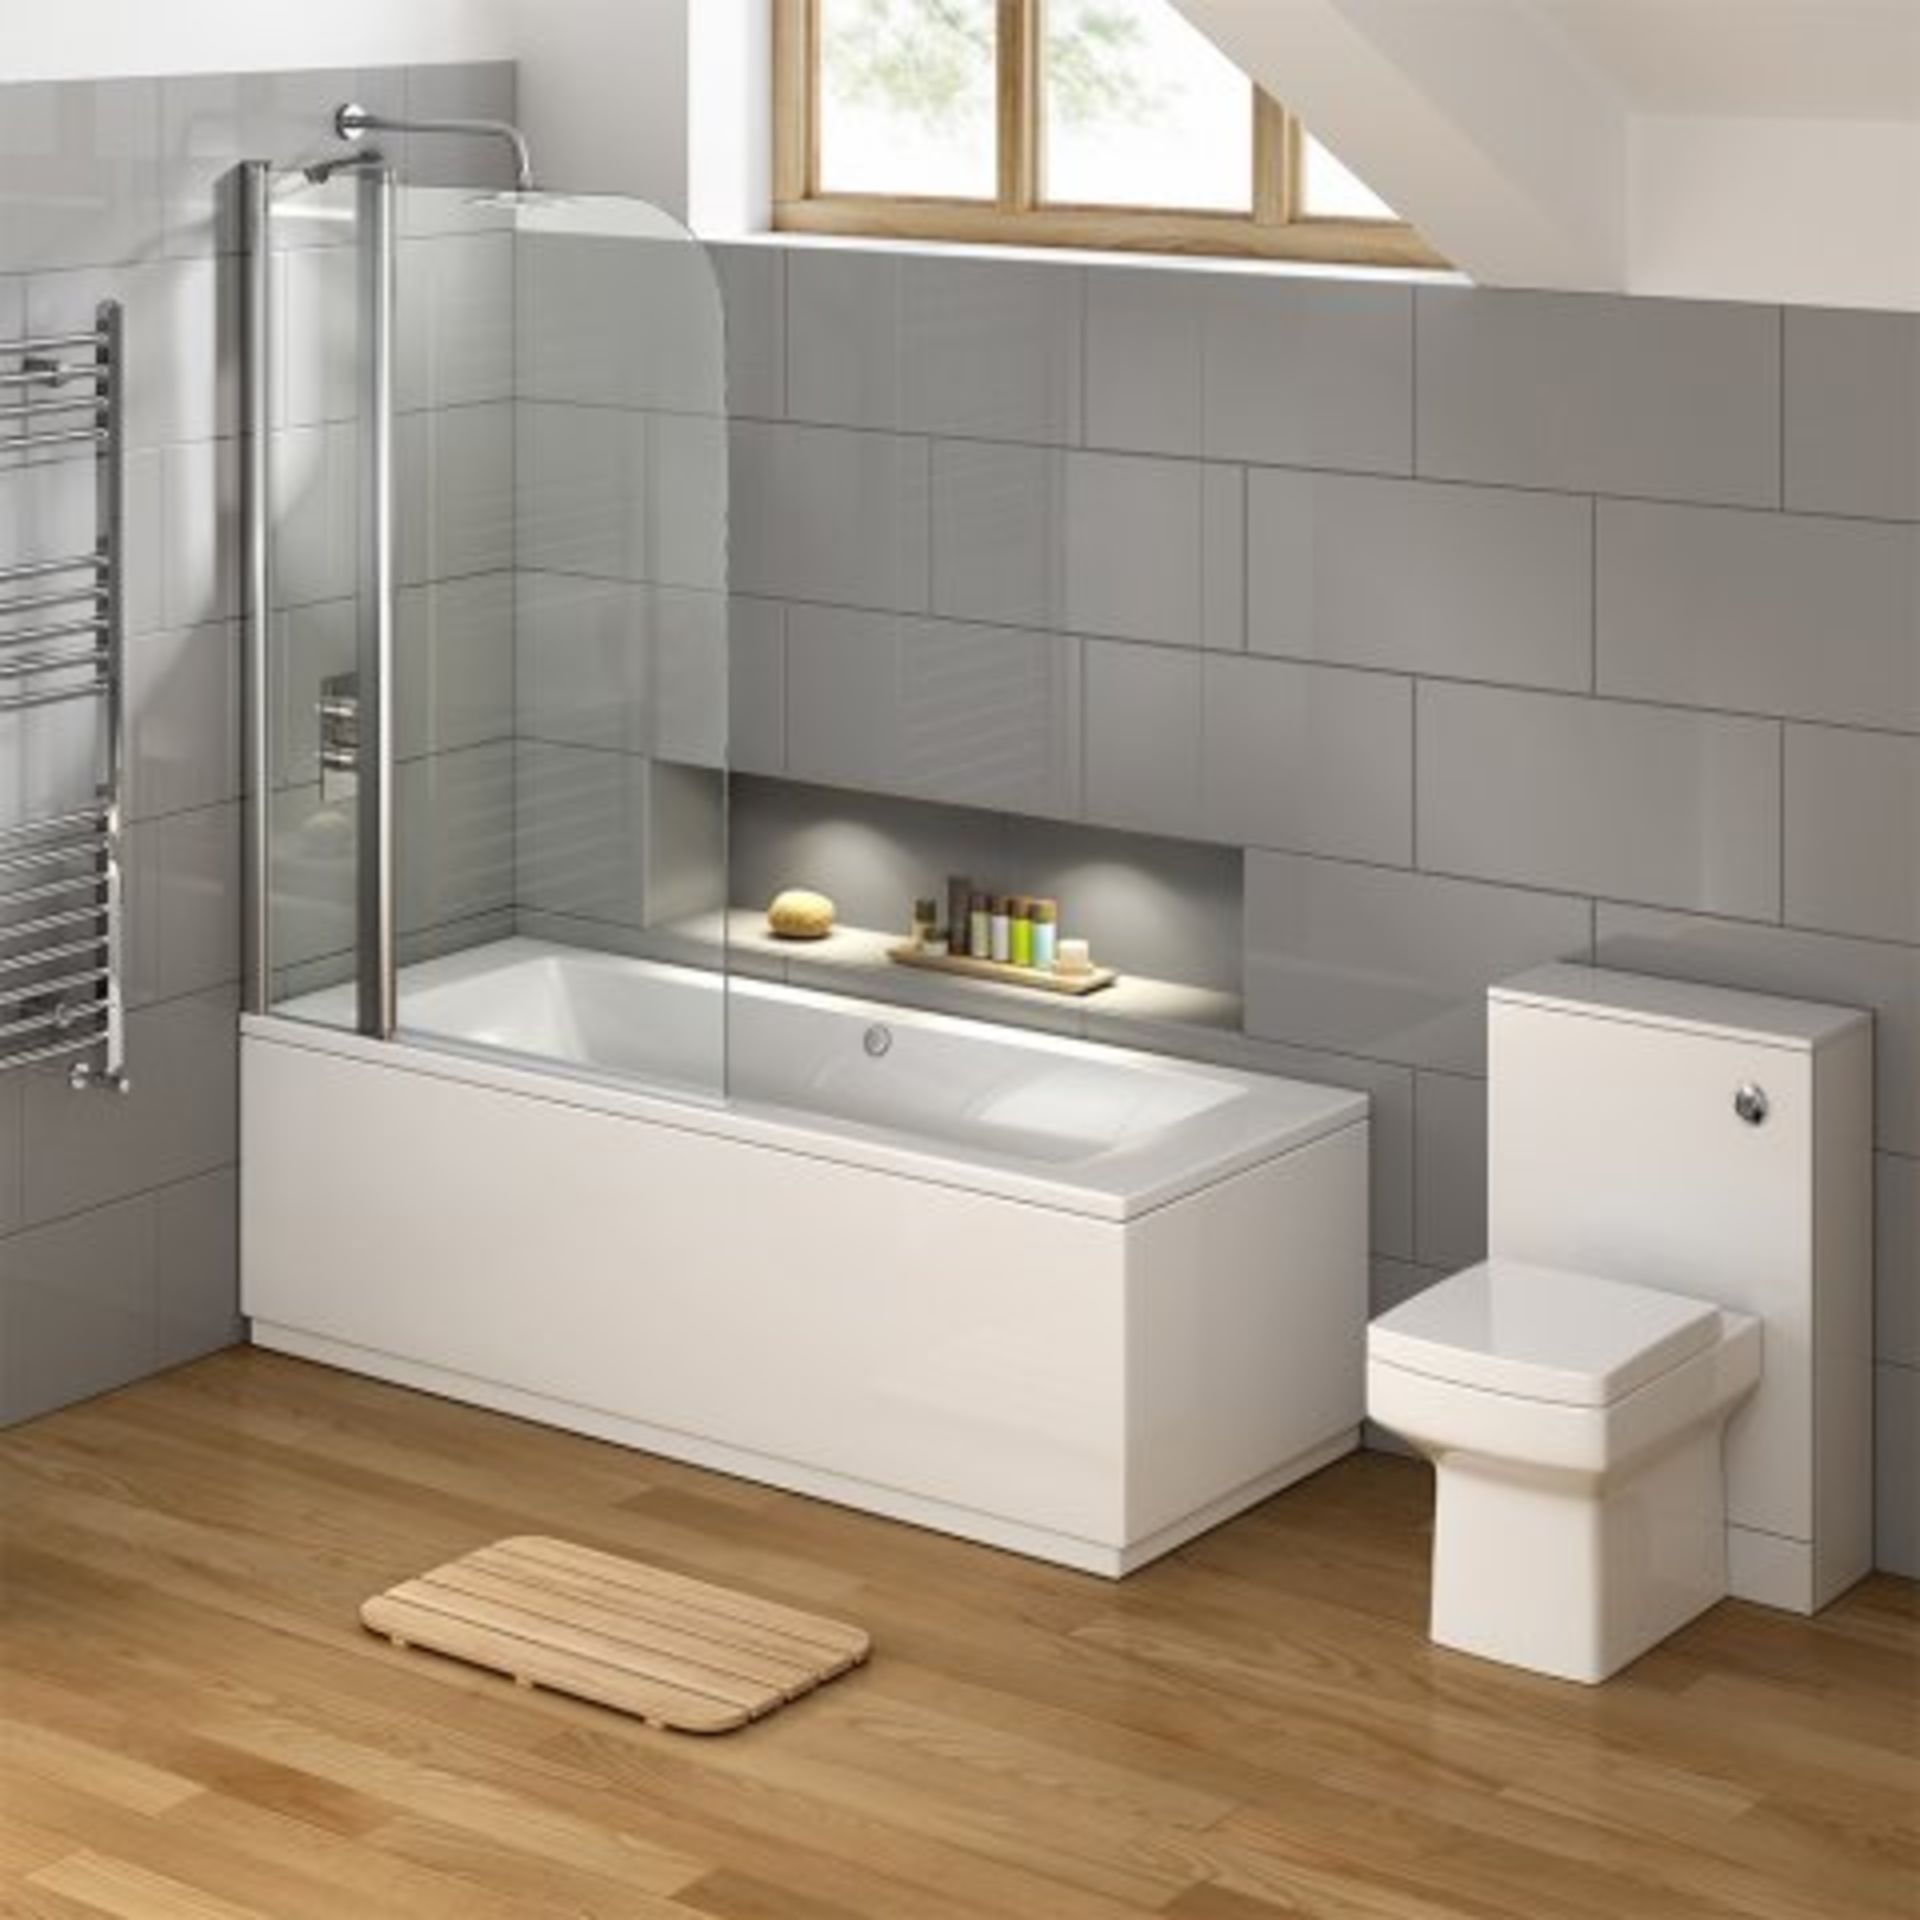 (L93) 1000mm - 6mm - EasyClean Straight Bath Screen RRP £224.99 The clue is in the name: Easy Clean! - Image 2 of 6